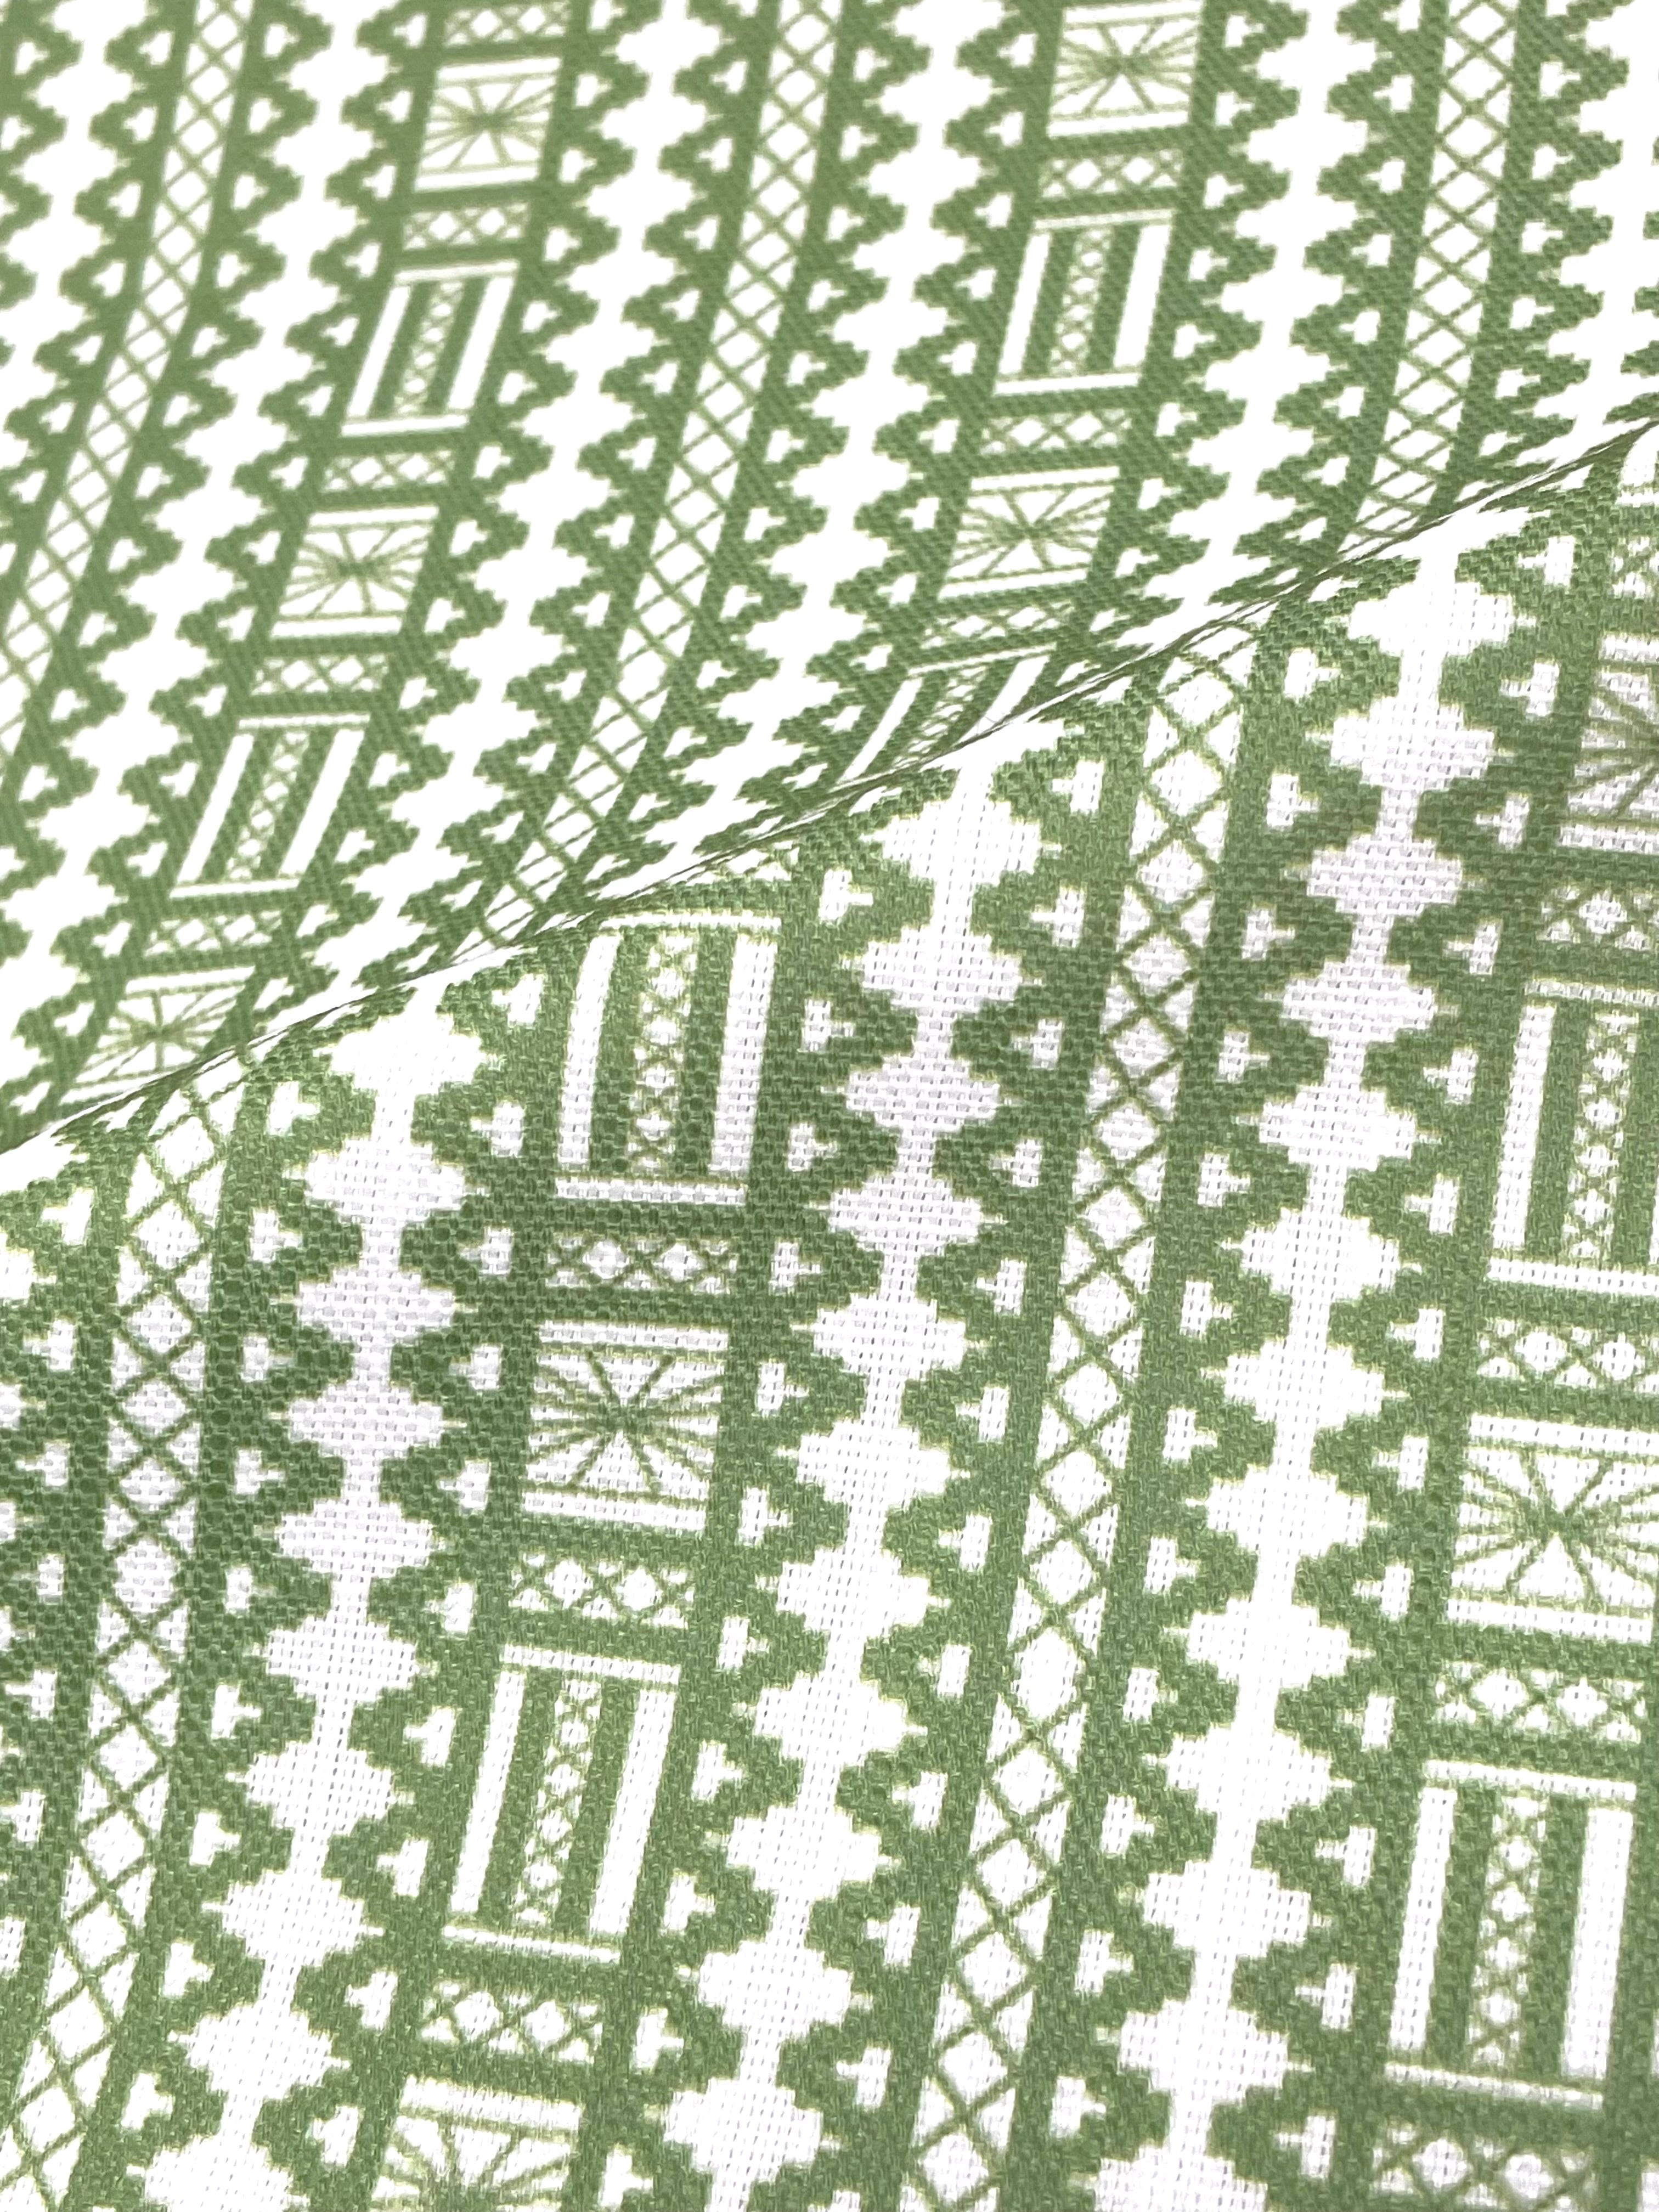 Digital Printed Aztec Stripe Faux Linen Fabric By The Yard, Curtain, Drapery, Table Top, 110" Width/CL1093